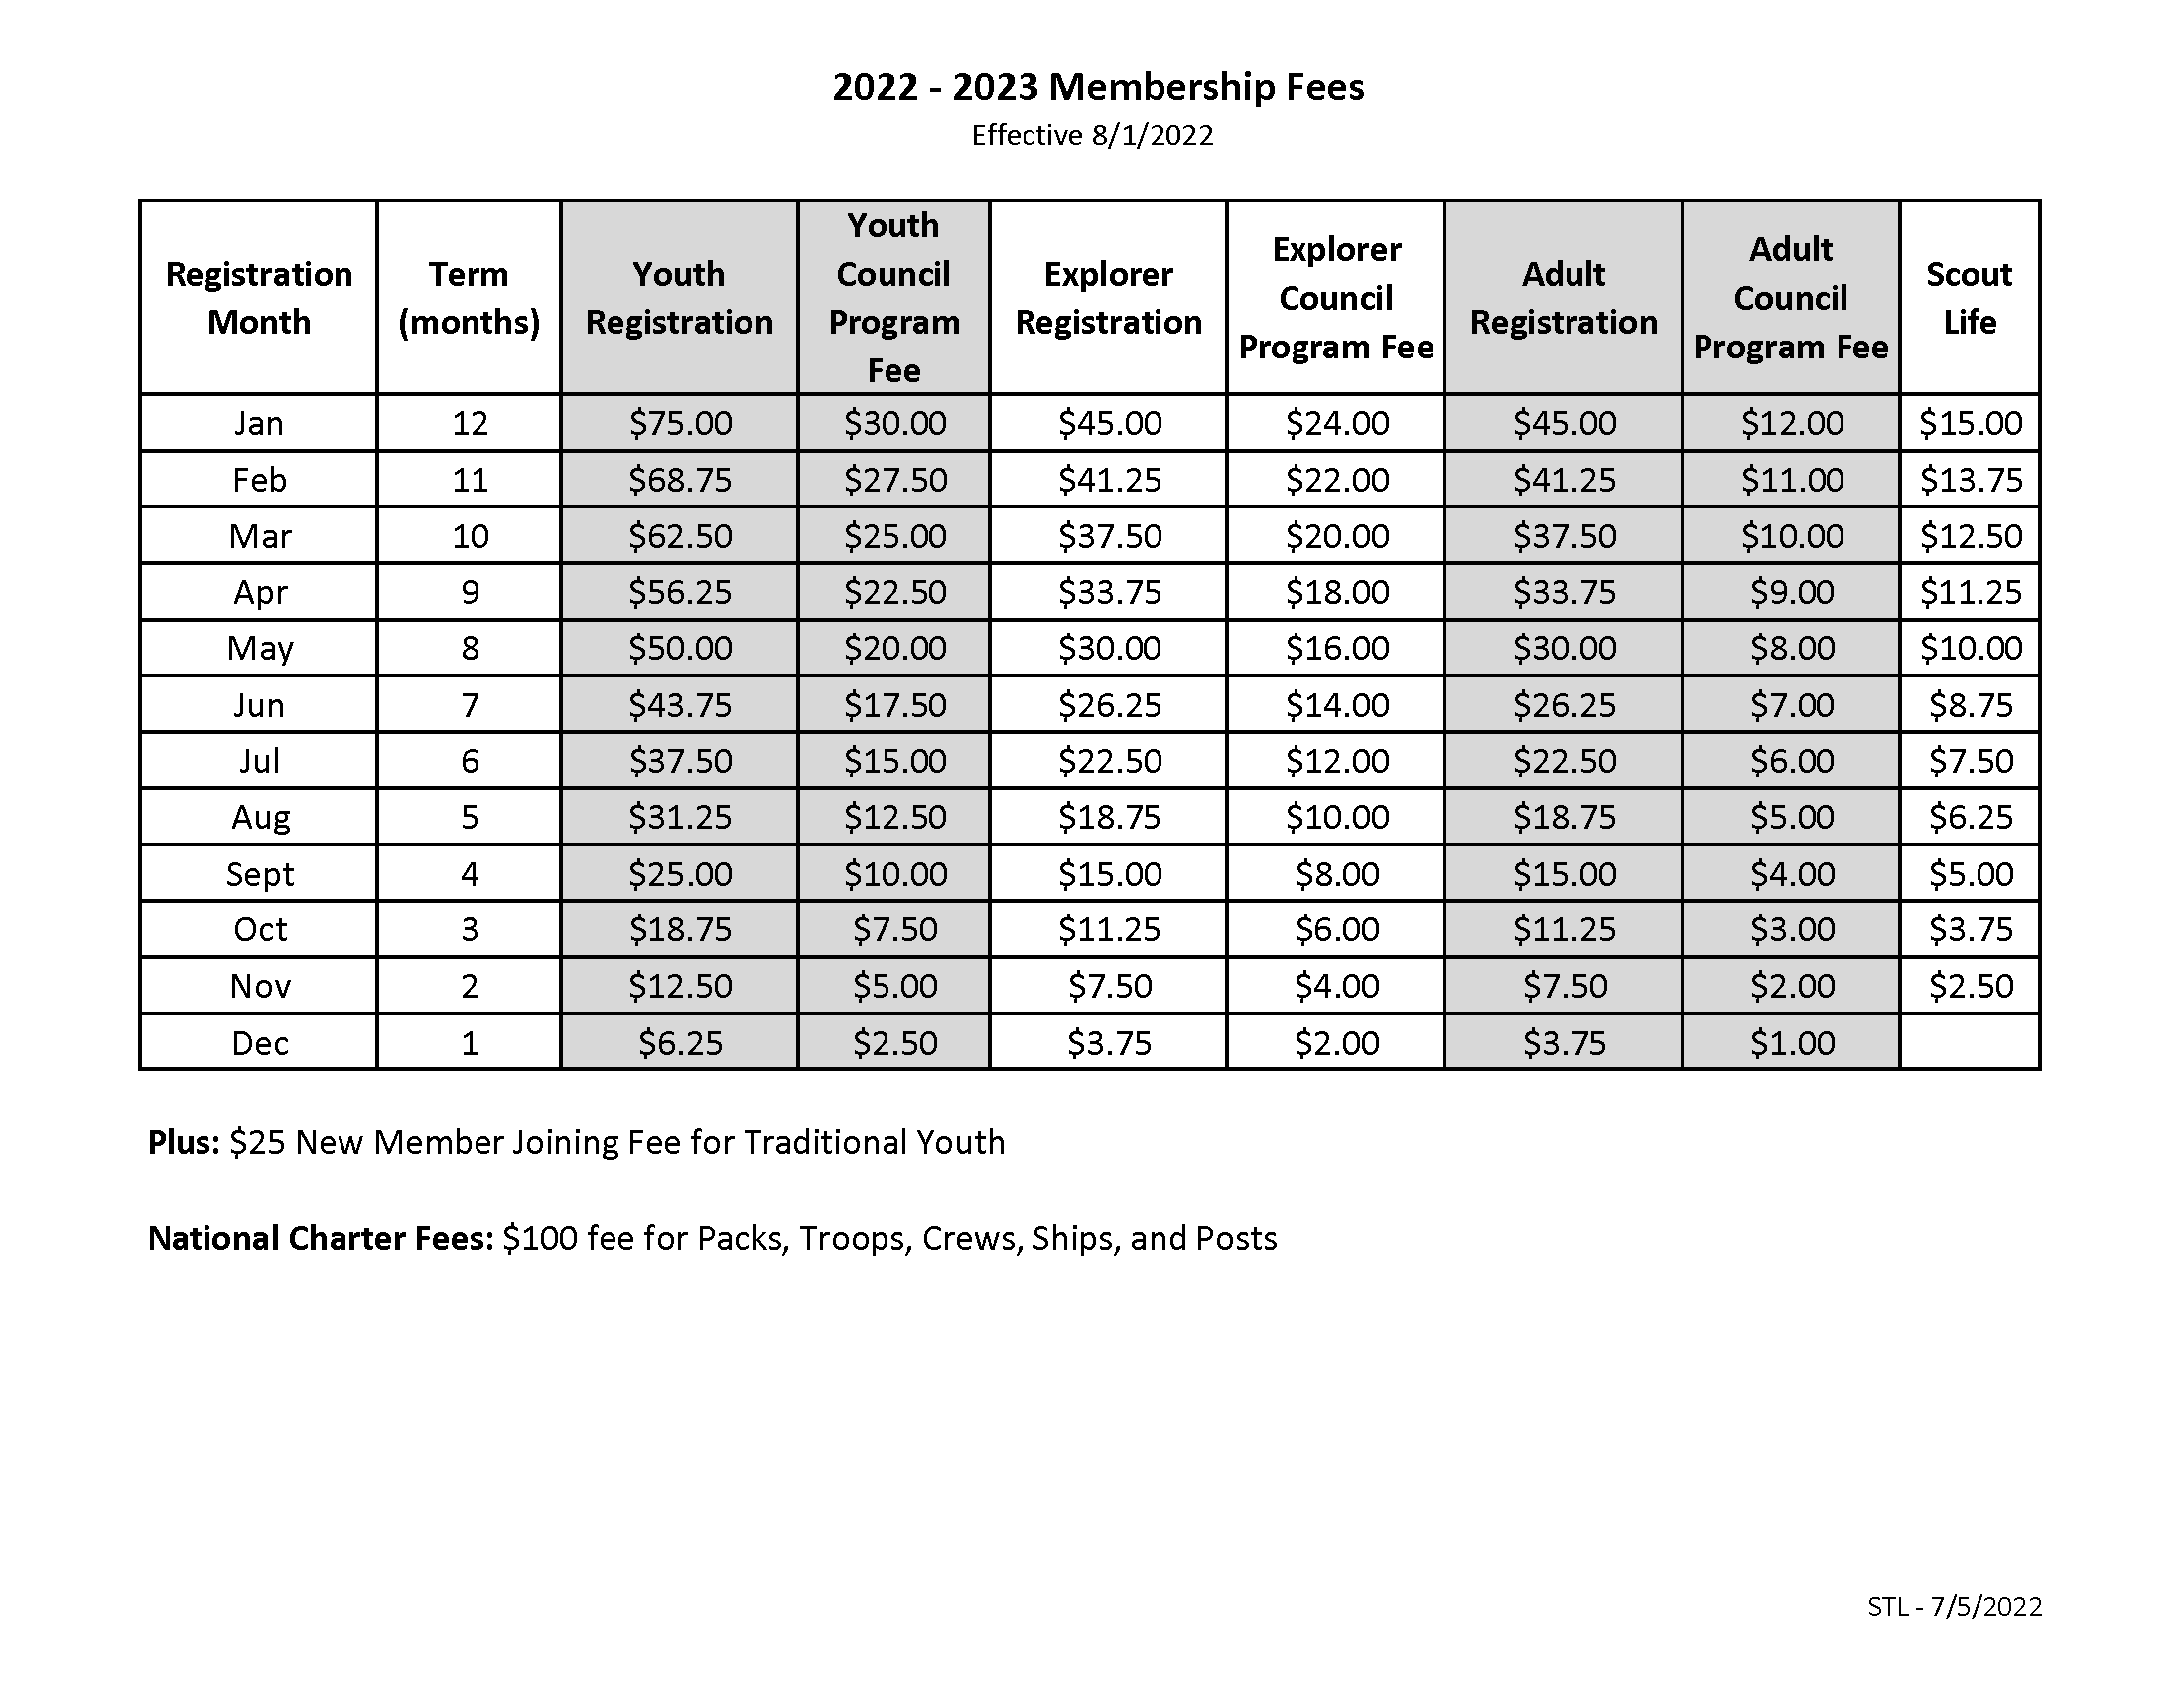 Table listing the 2023 membership fees by month